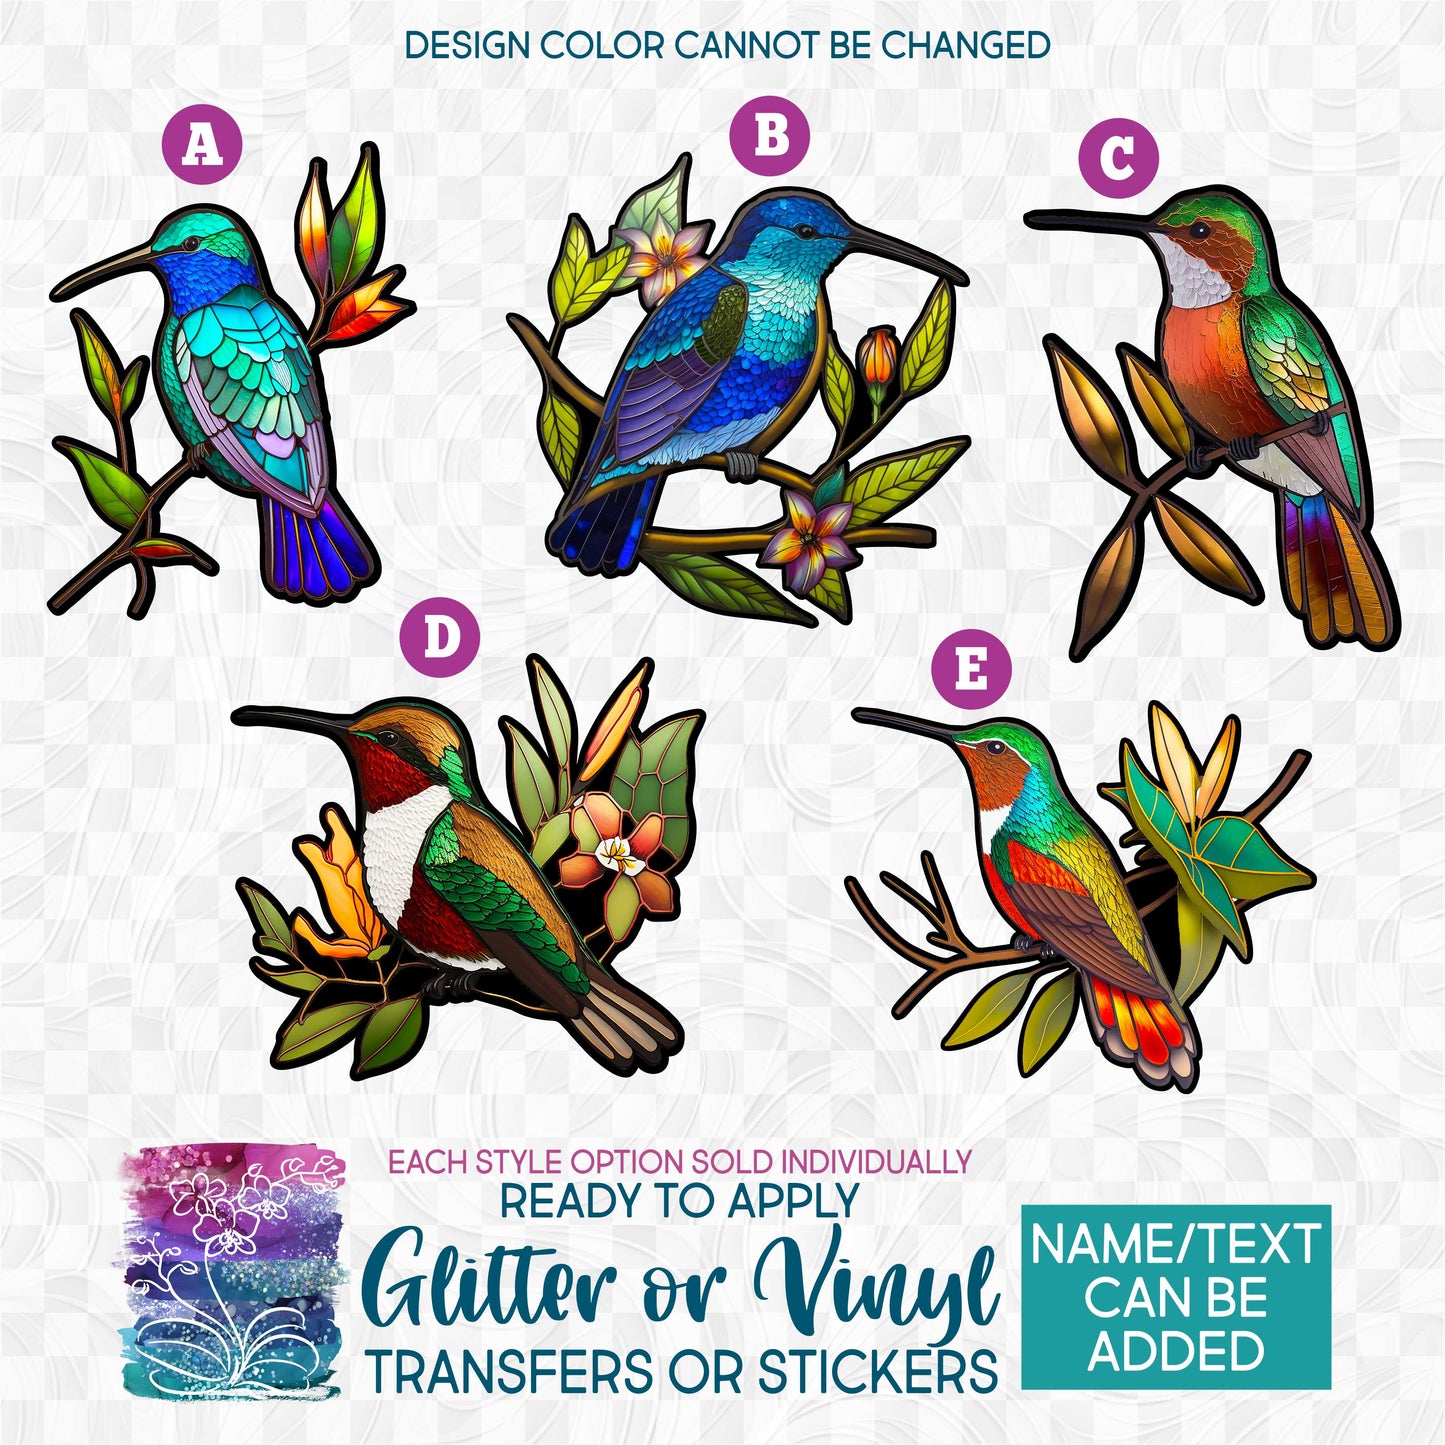 (s150-03) Stained-Glass Hummingbird Glitter or Vinyl Iron-On Transfer or Sticker